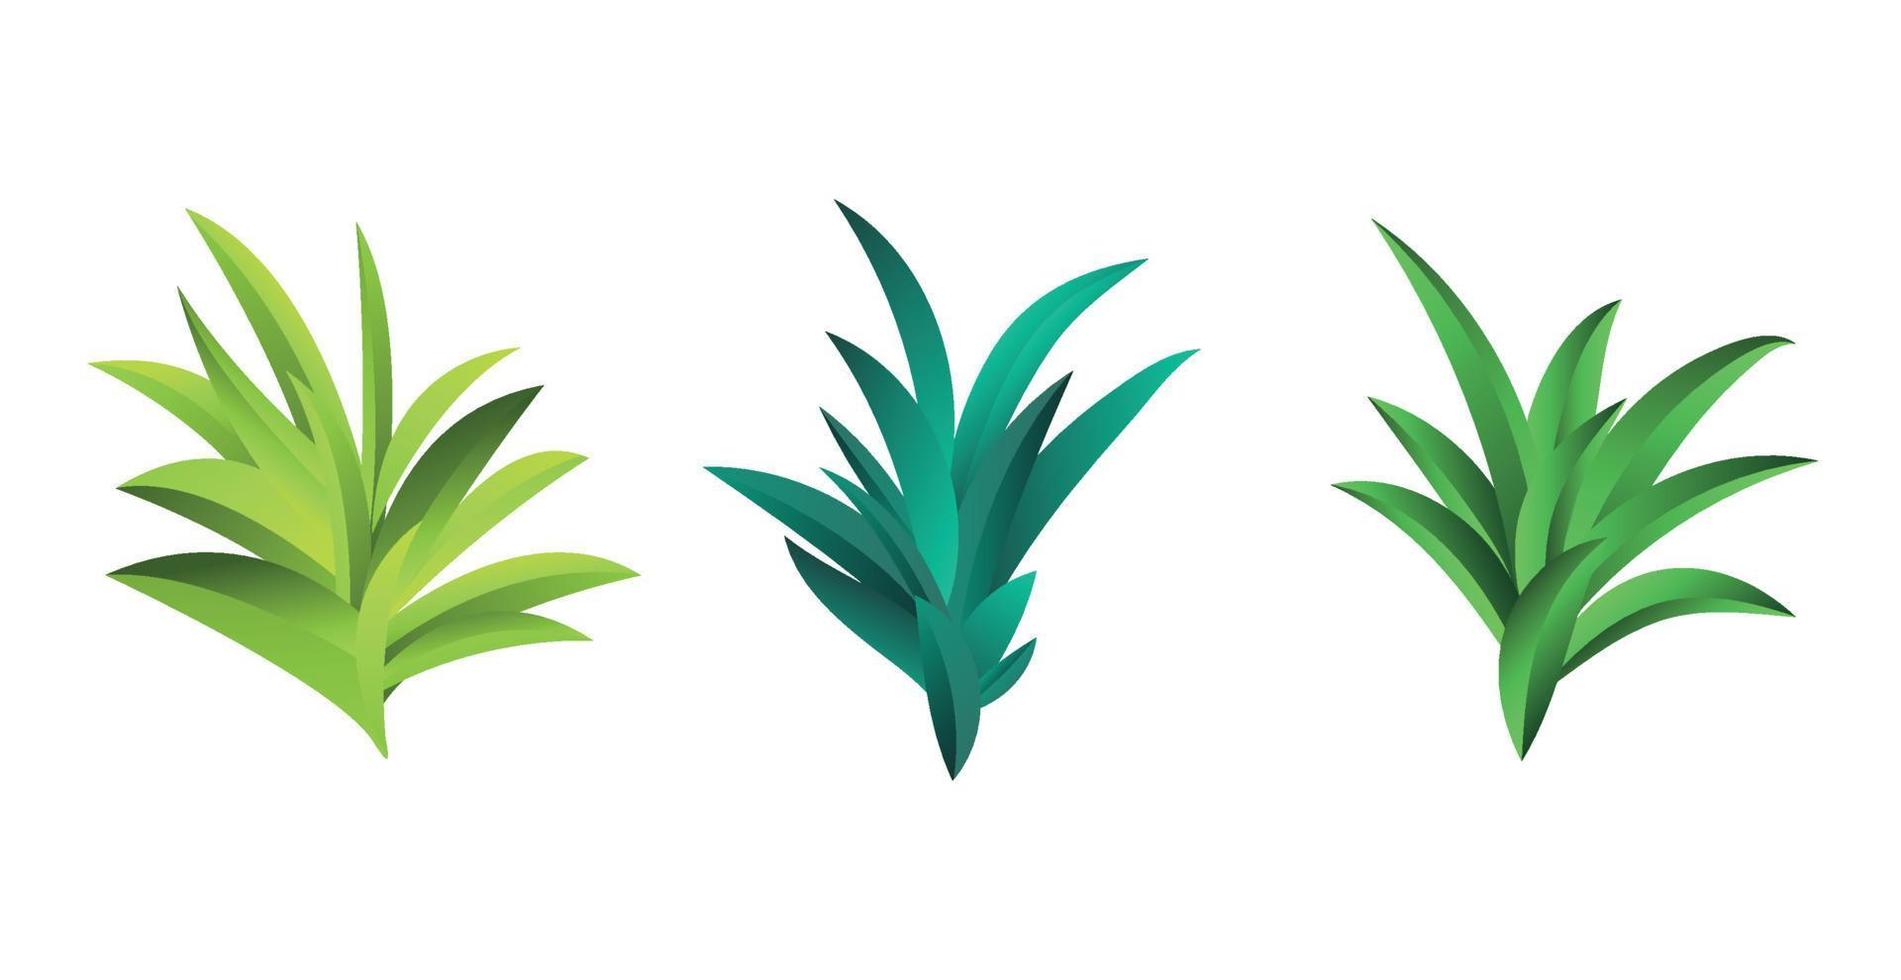 Set of 3 pcs bunches of grass of different colors on a white background - Vector